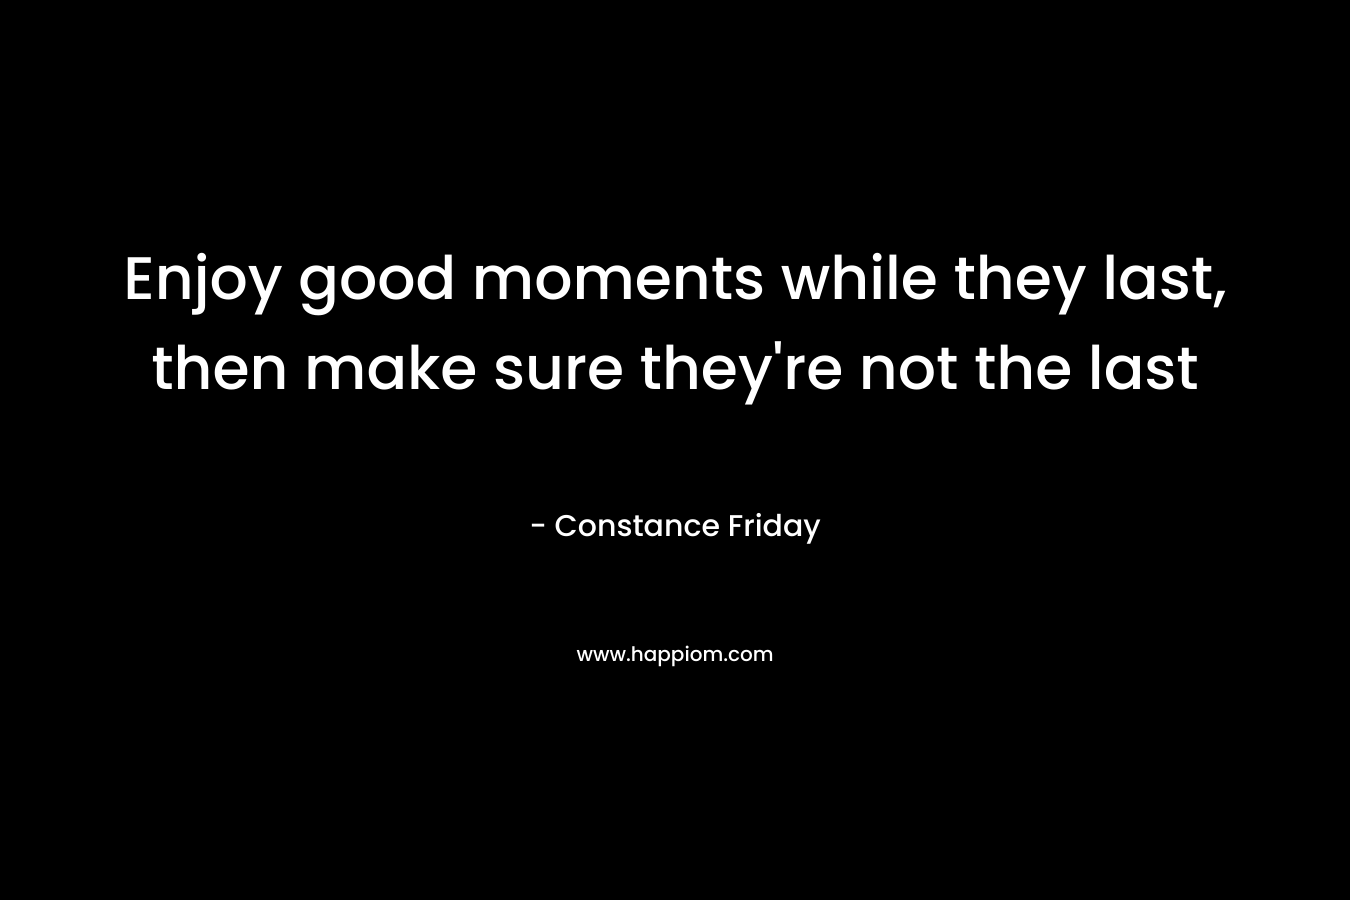 Enjoy good moments while they last, then make sure they’re not the last – Constance Friday